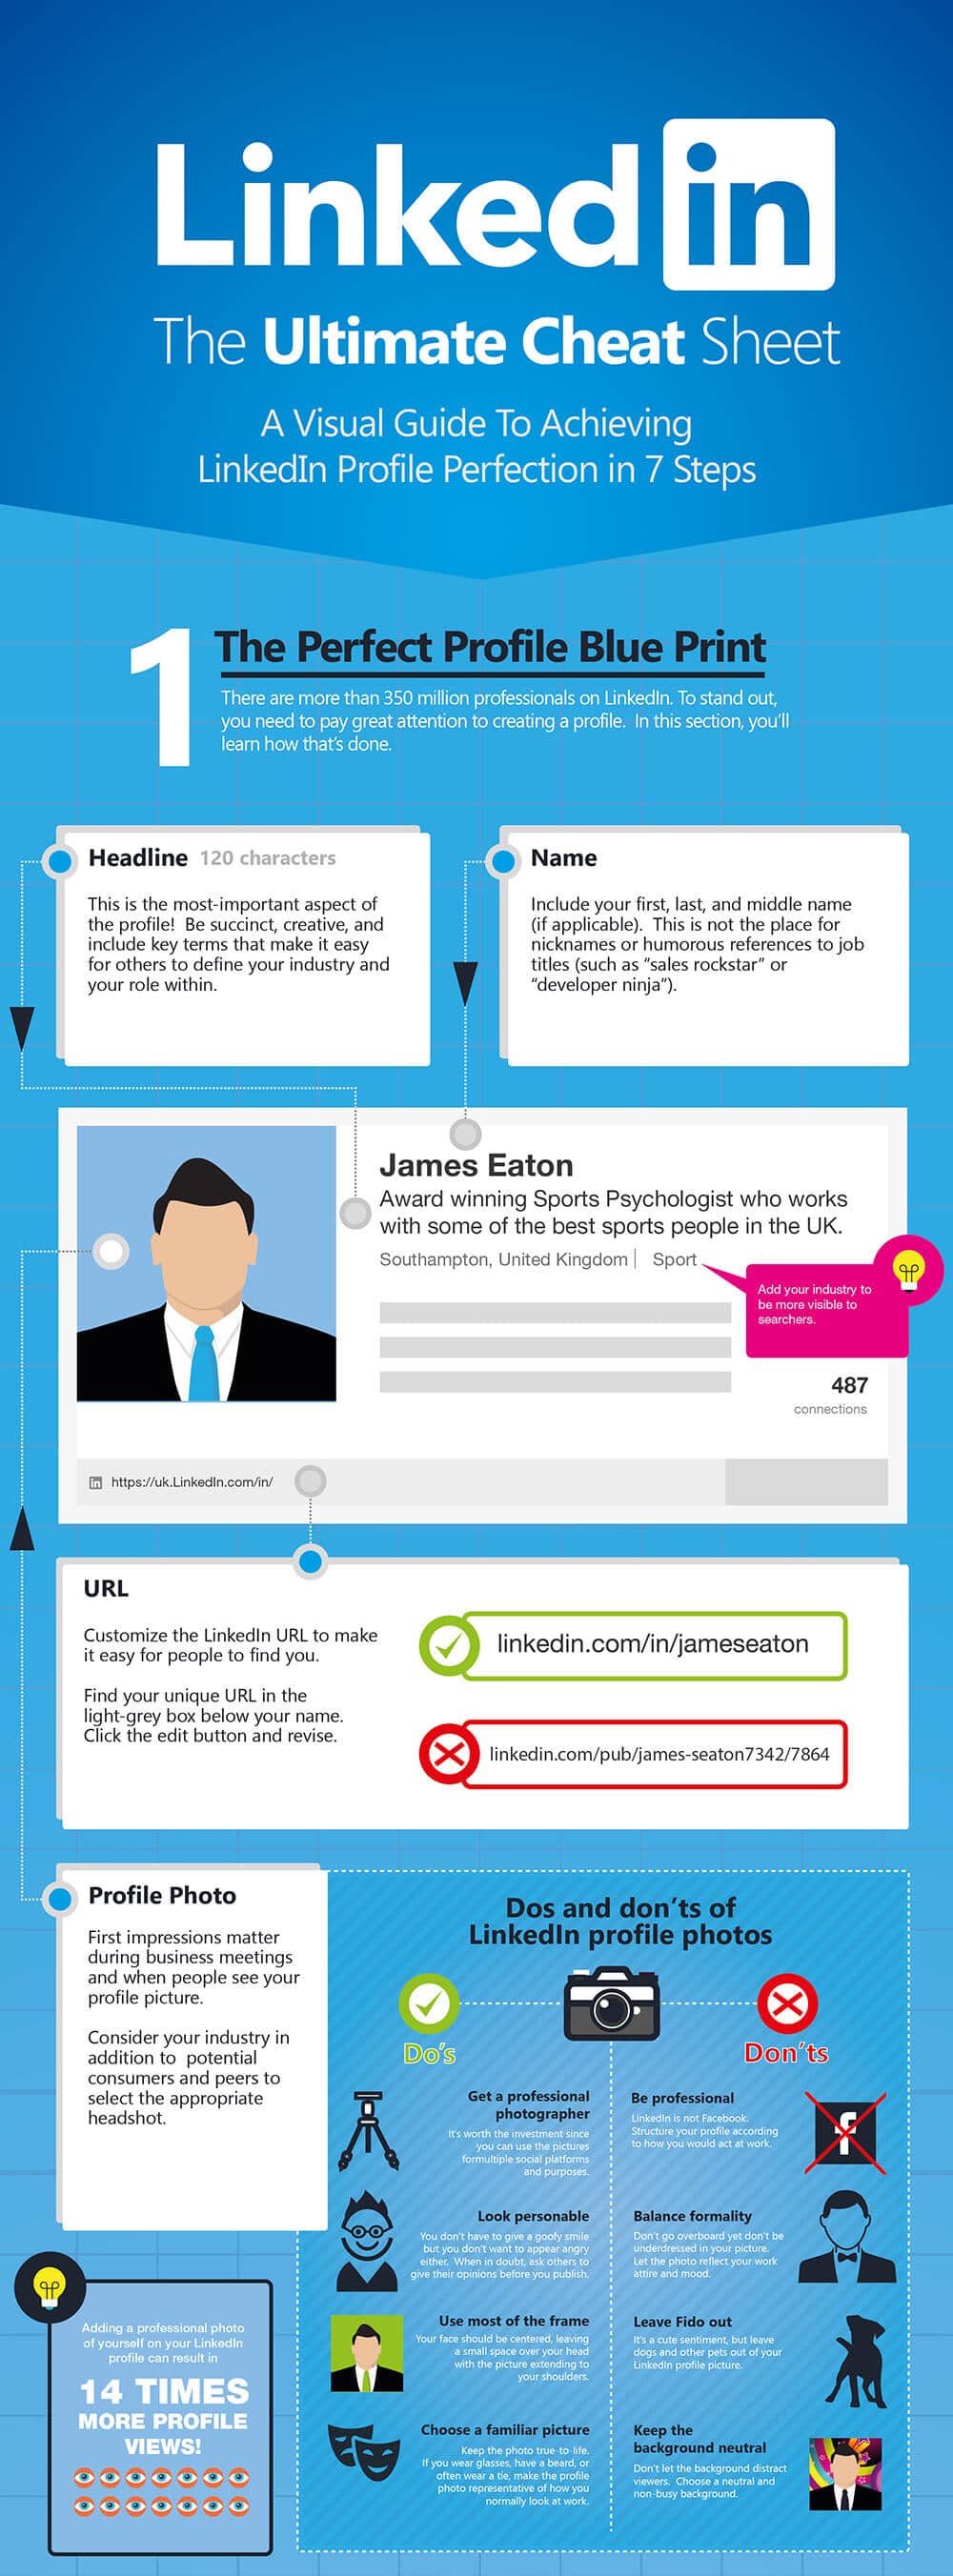 LinkedIn Ultimate Cheat Sheet: A Visual Guide To Achieving LinkedIn Profile Perfection In 7 Steps Part 1